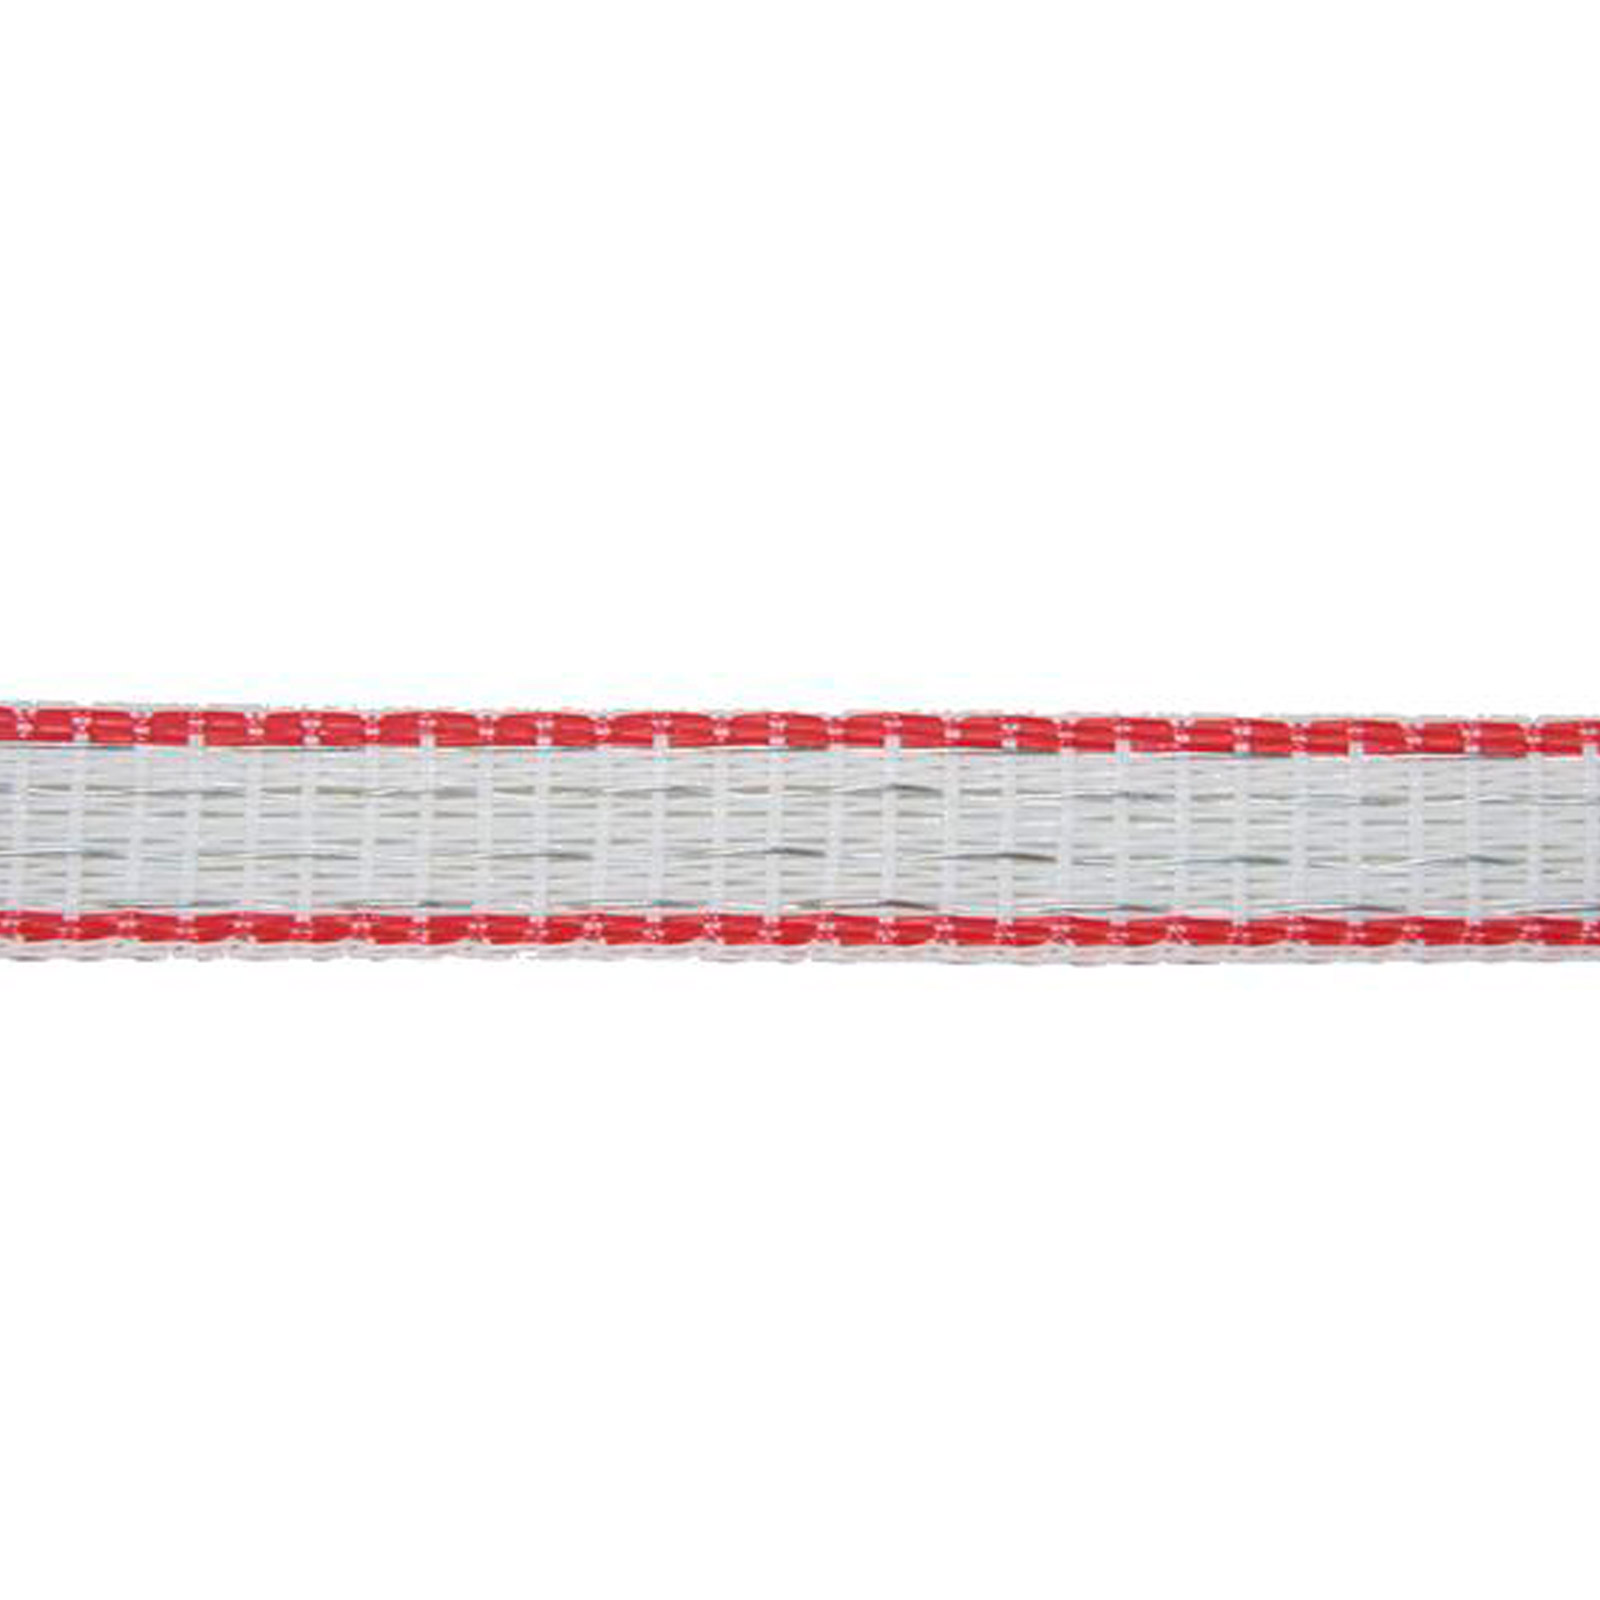 Agrarzone Pasture Fence Tape Premium 0.30 TriCOND, white-red 200 m x 12 mm